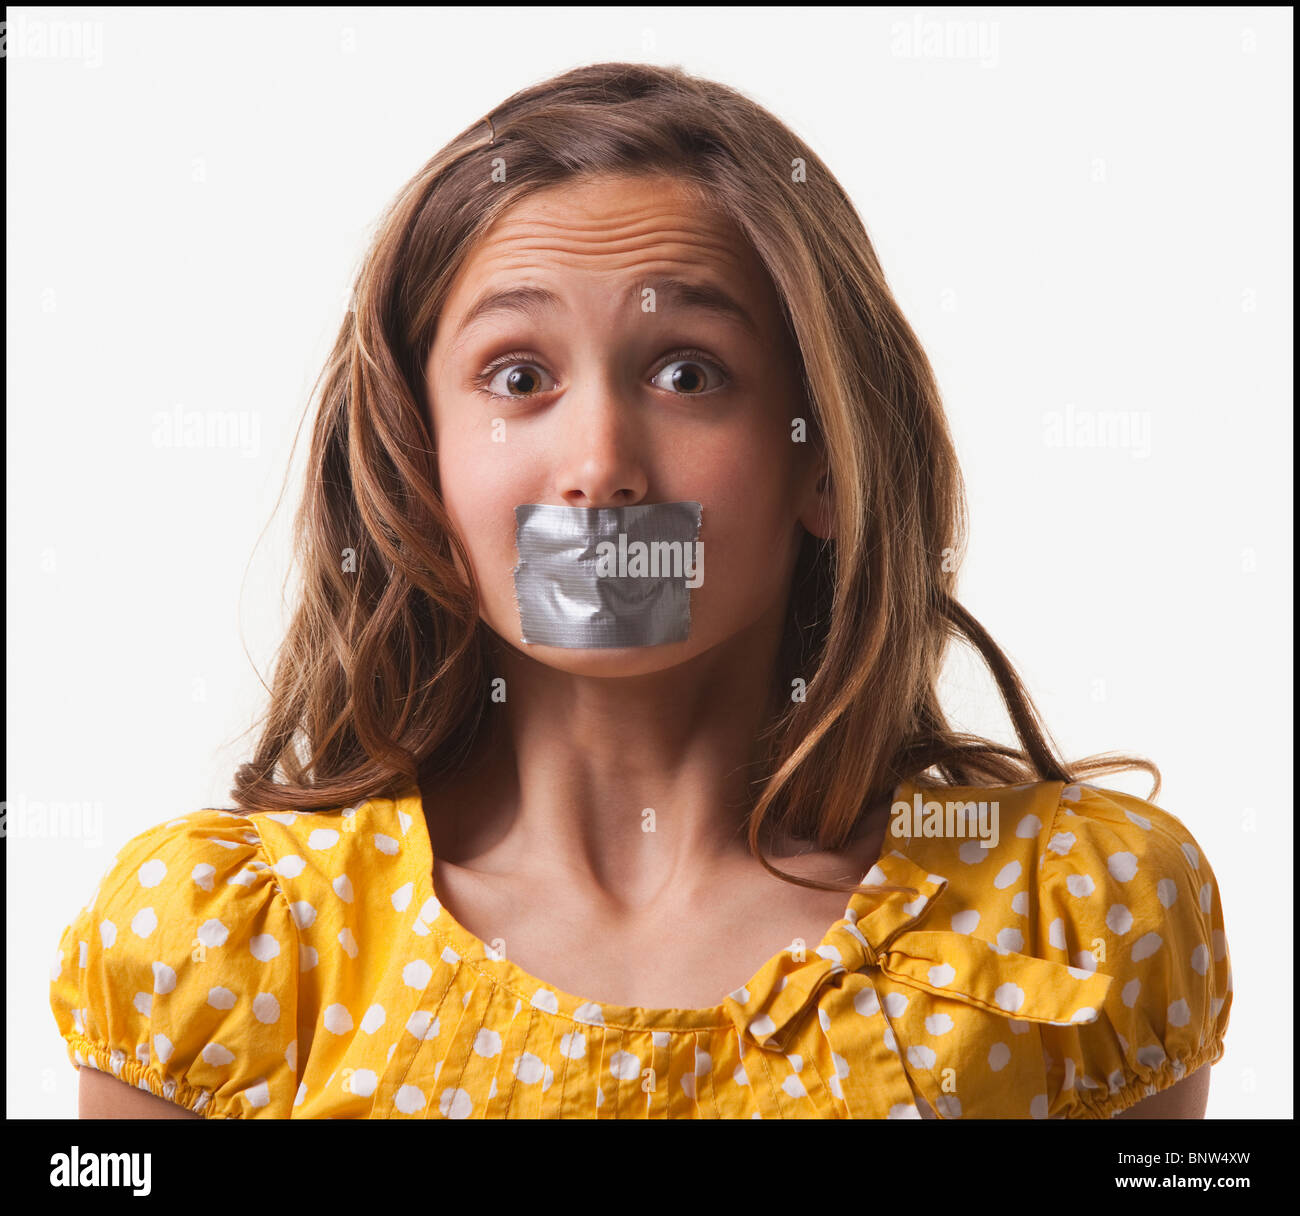 Teenage girl with duct tape on her mouth Stock Photo - Alamy